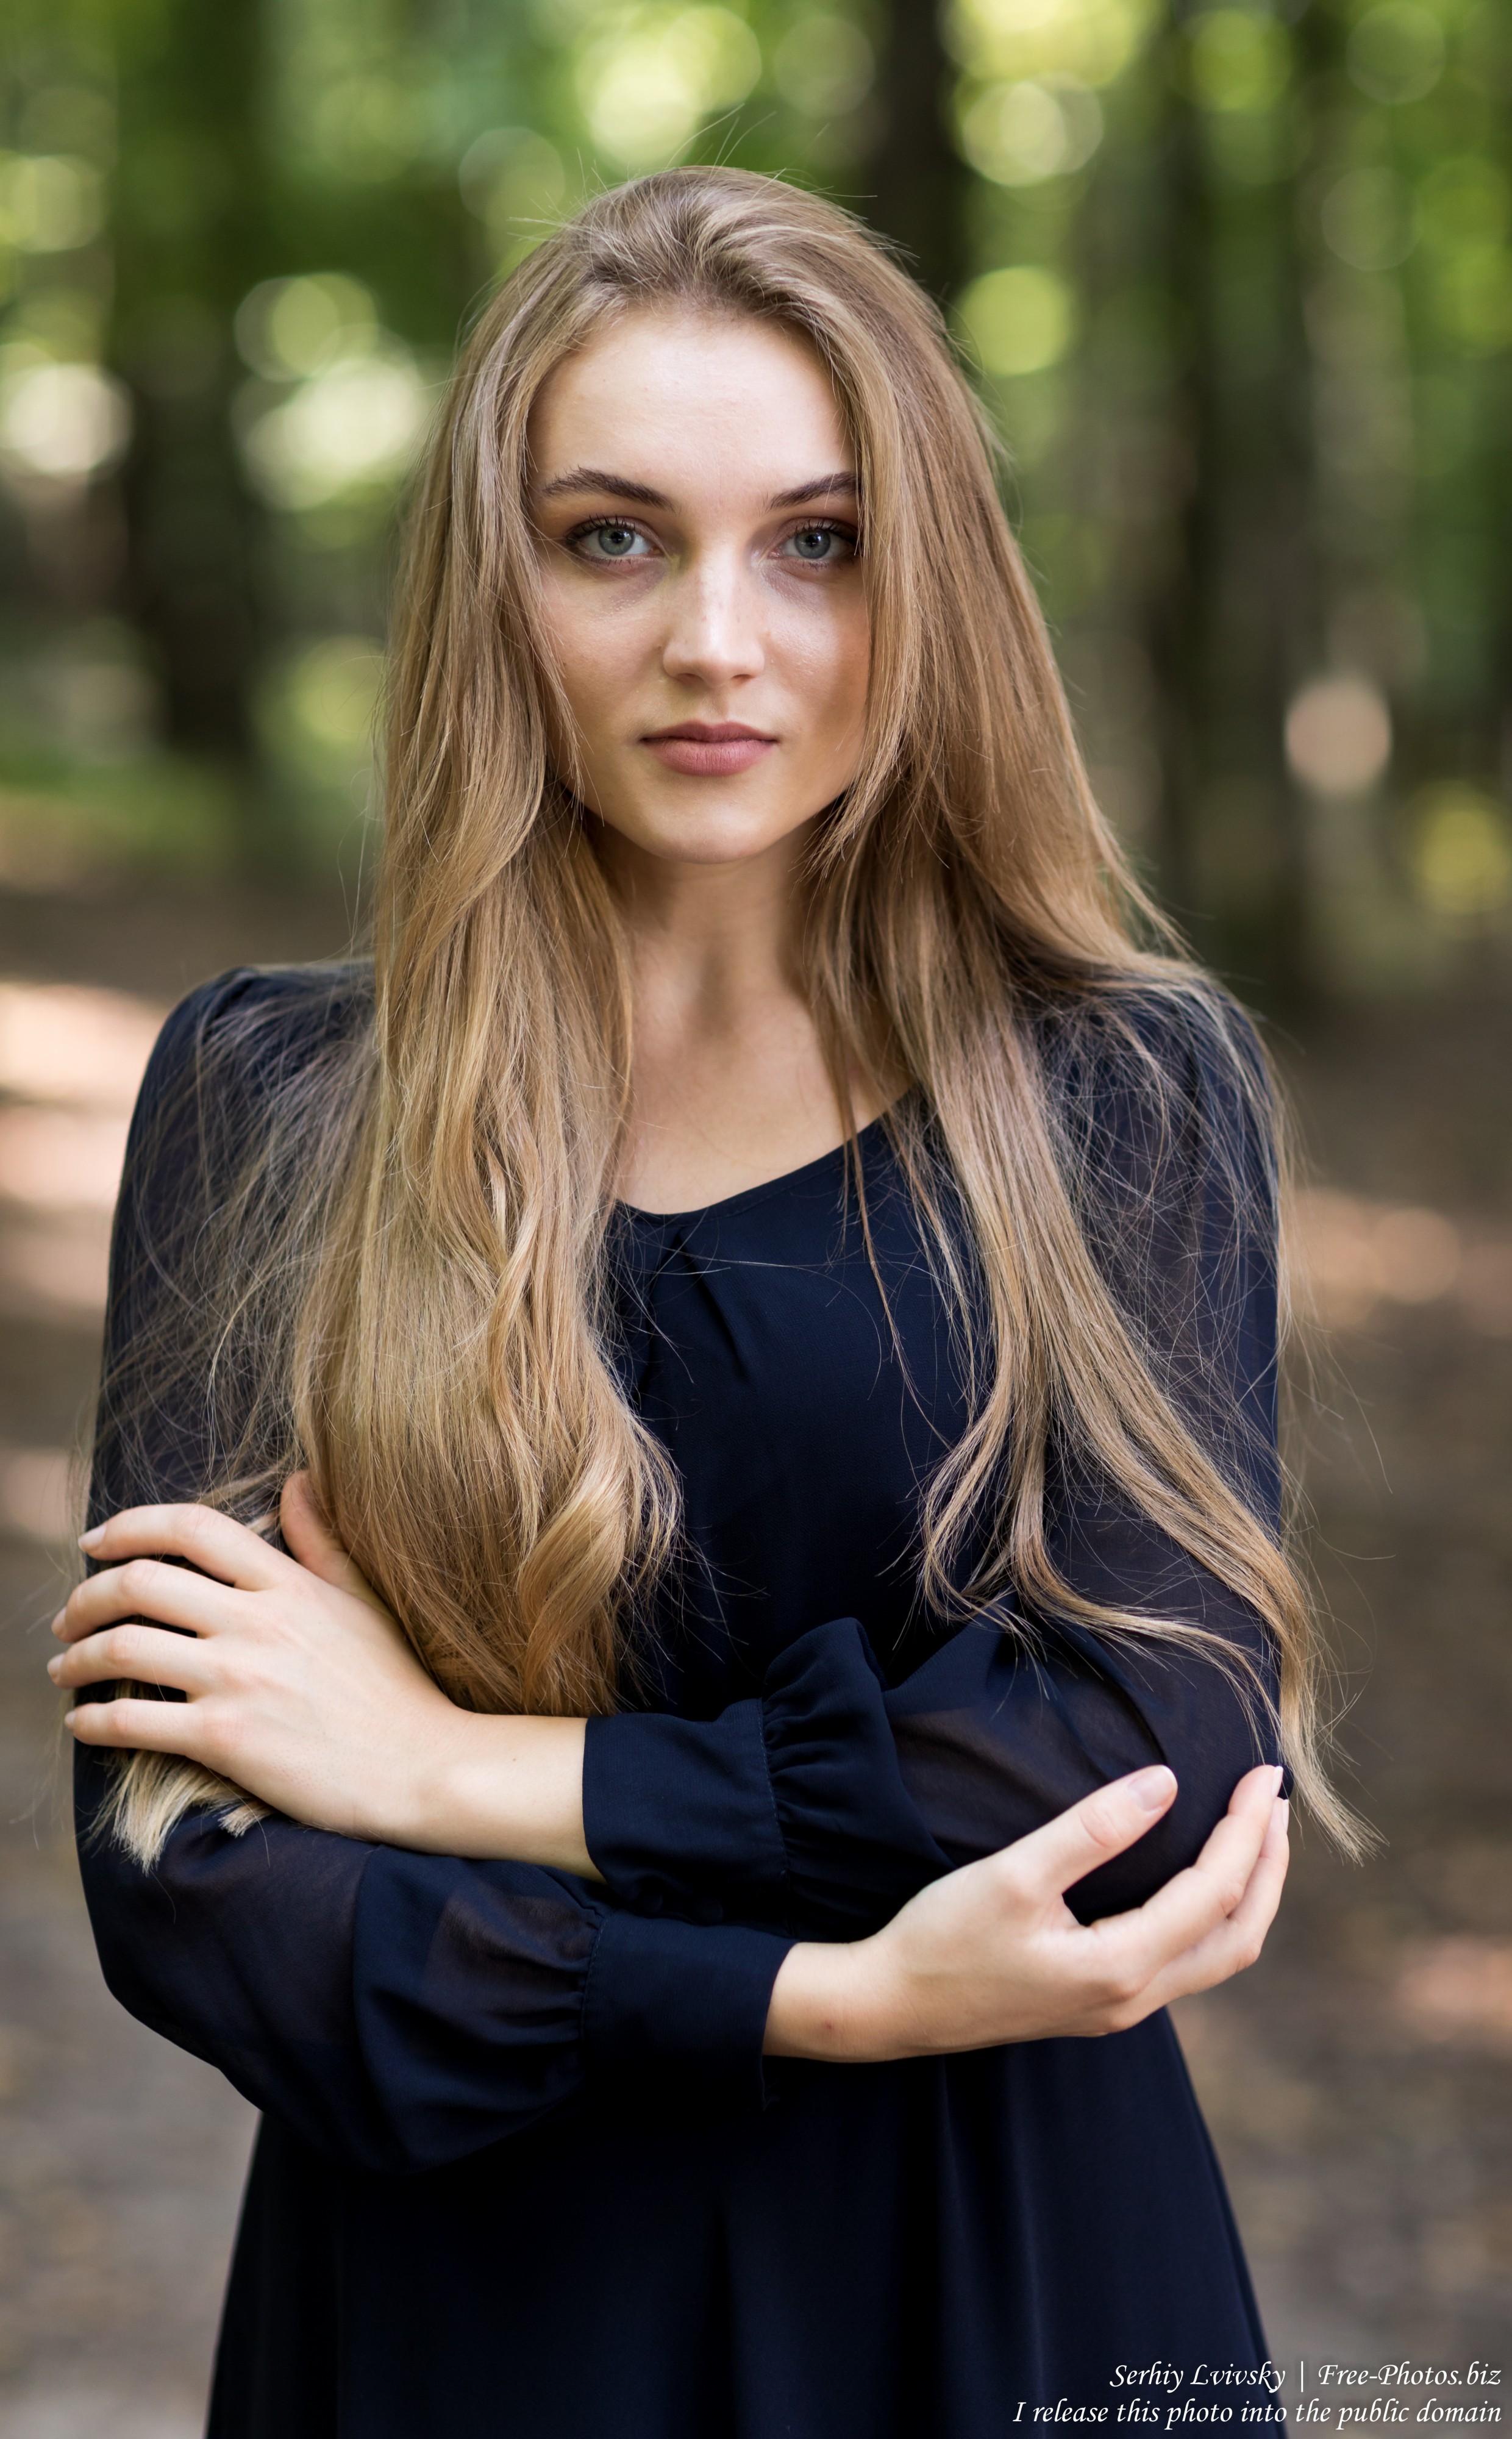 Photo Of Yaryna A 21 Year Old Natural Blonde Catholic Girl